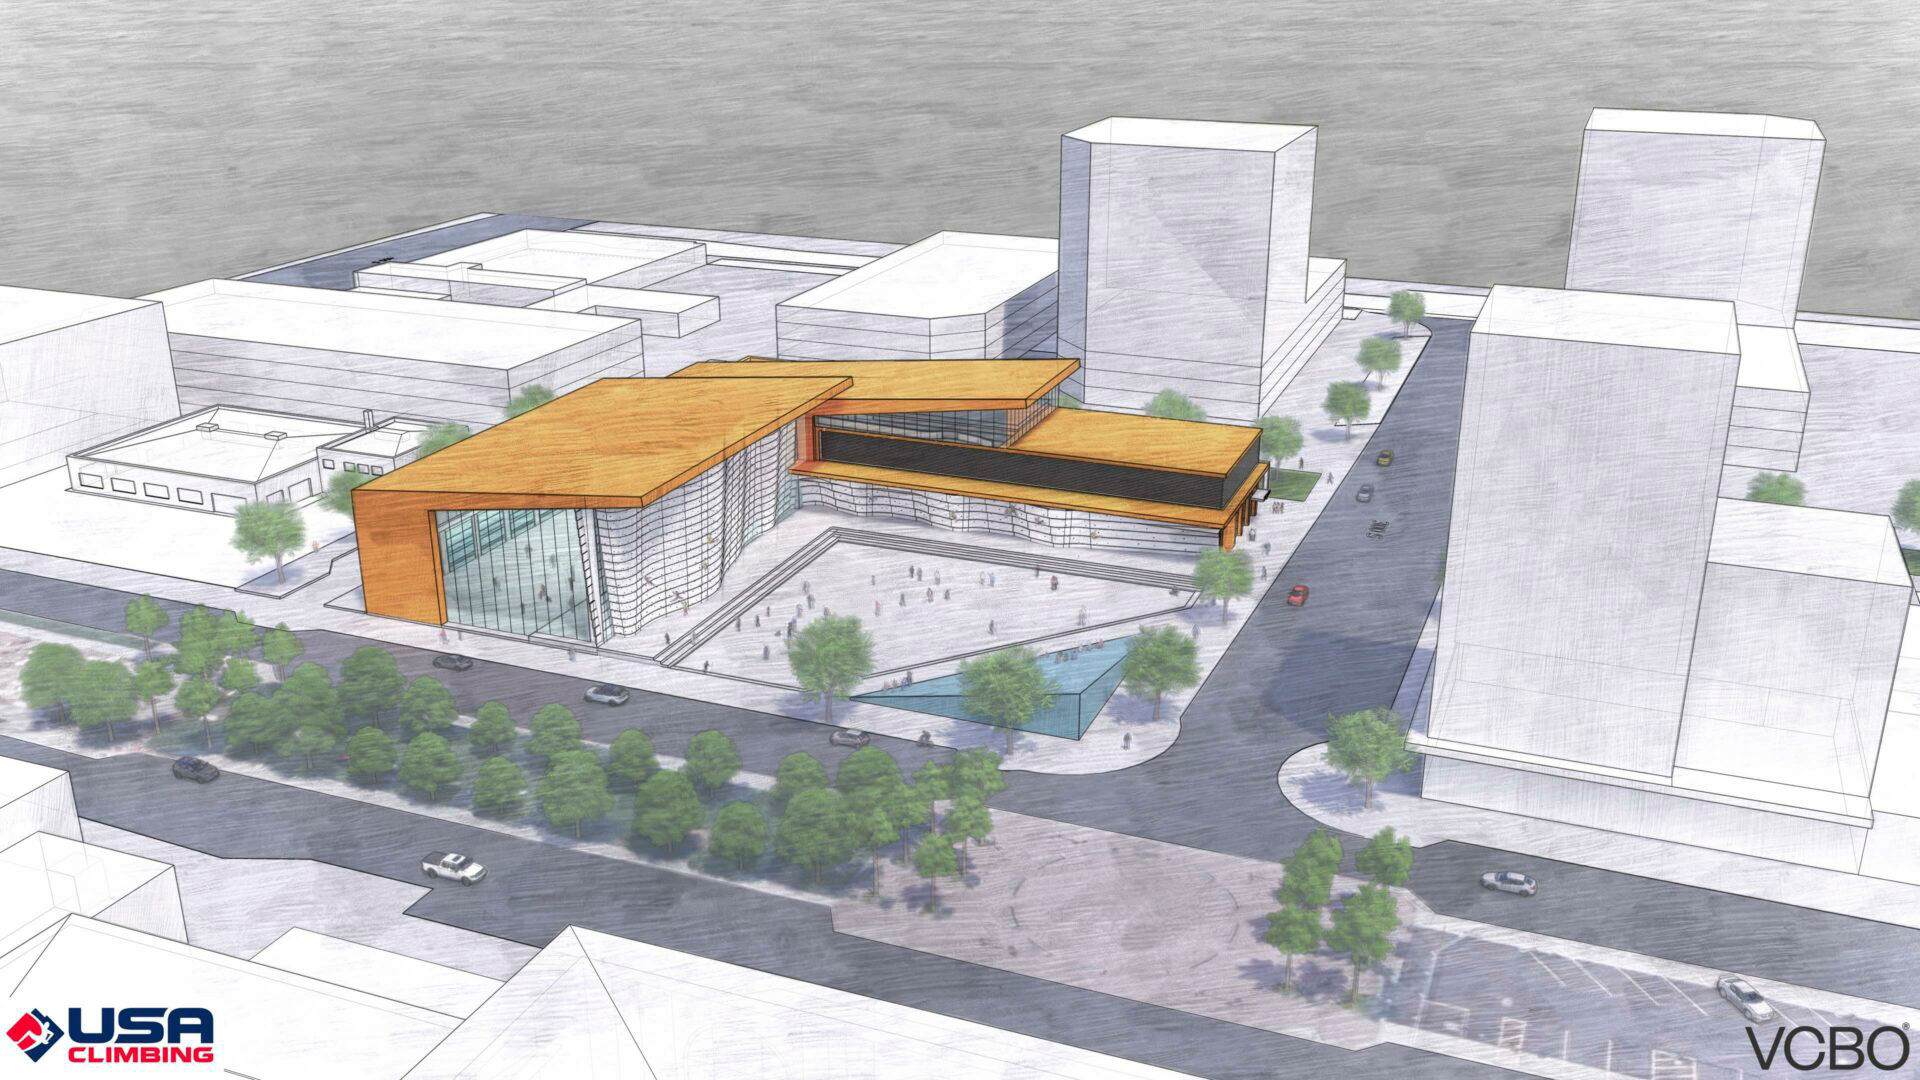 Sketch of the planned National Training Center in SLC